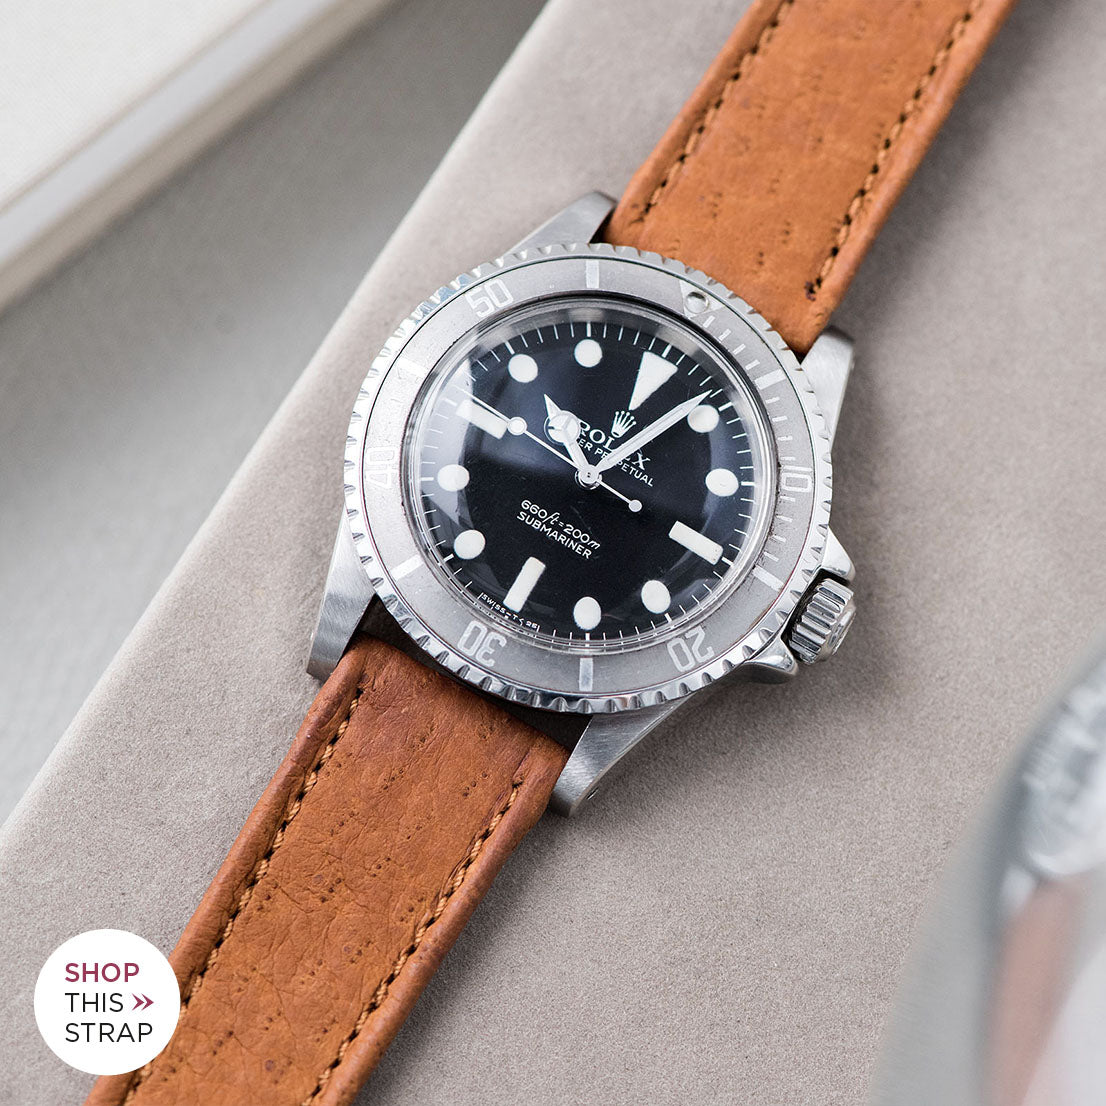 Bulang and Sons_Strap Guide_The Rolex 5513 Faded Maxi Submariner_Peccary Brown Heritage Leather Watch Strap